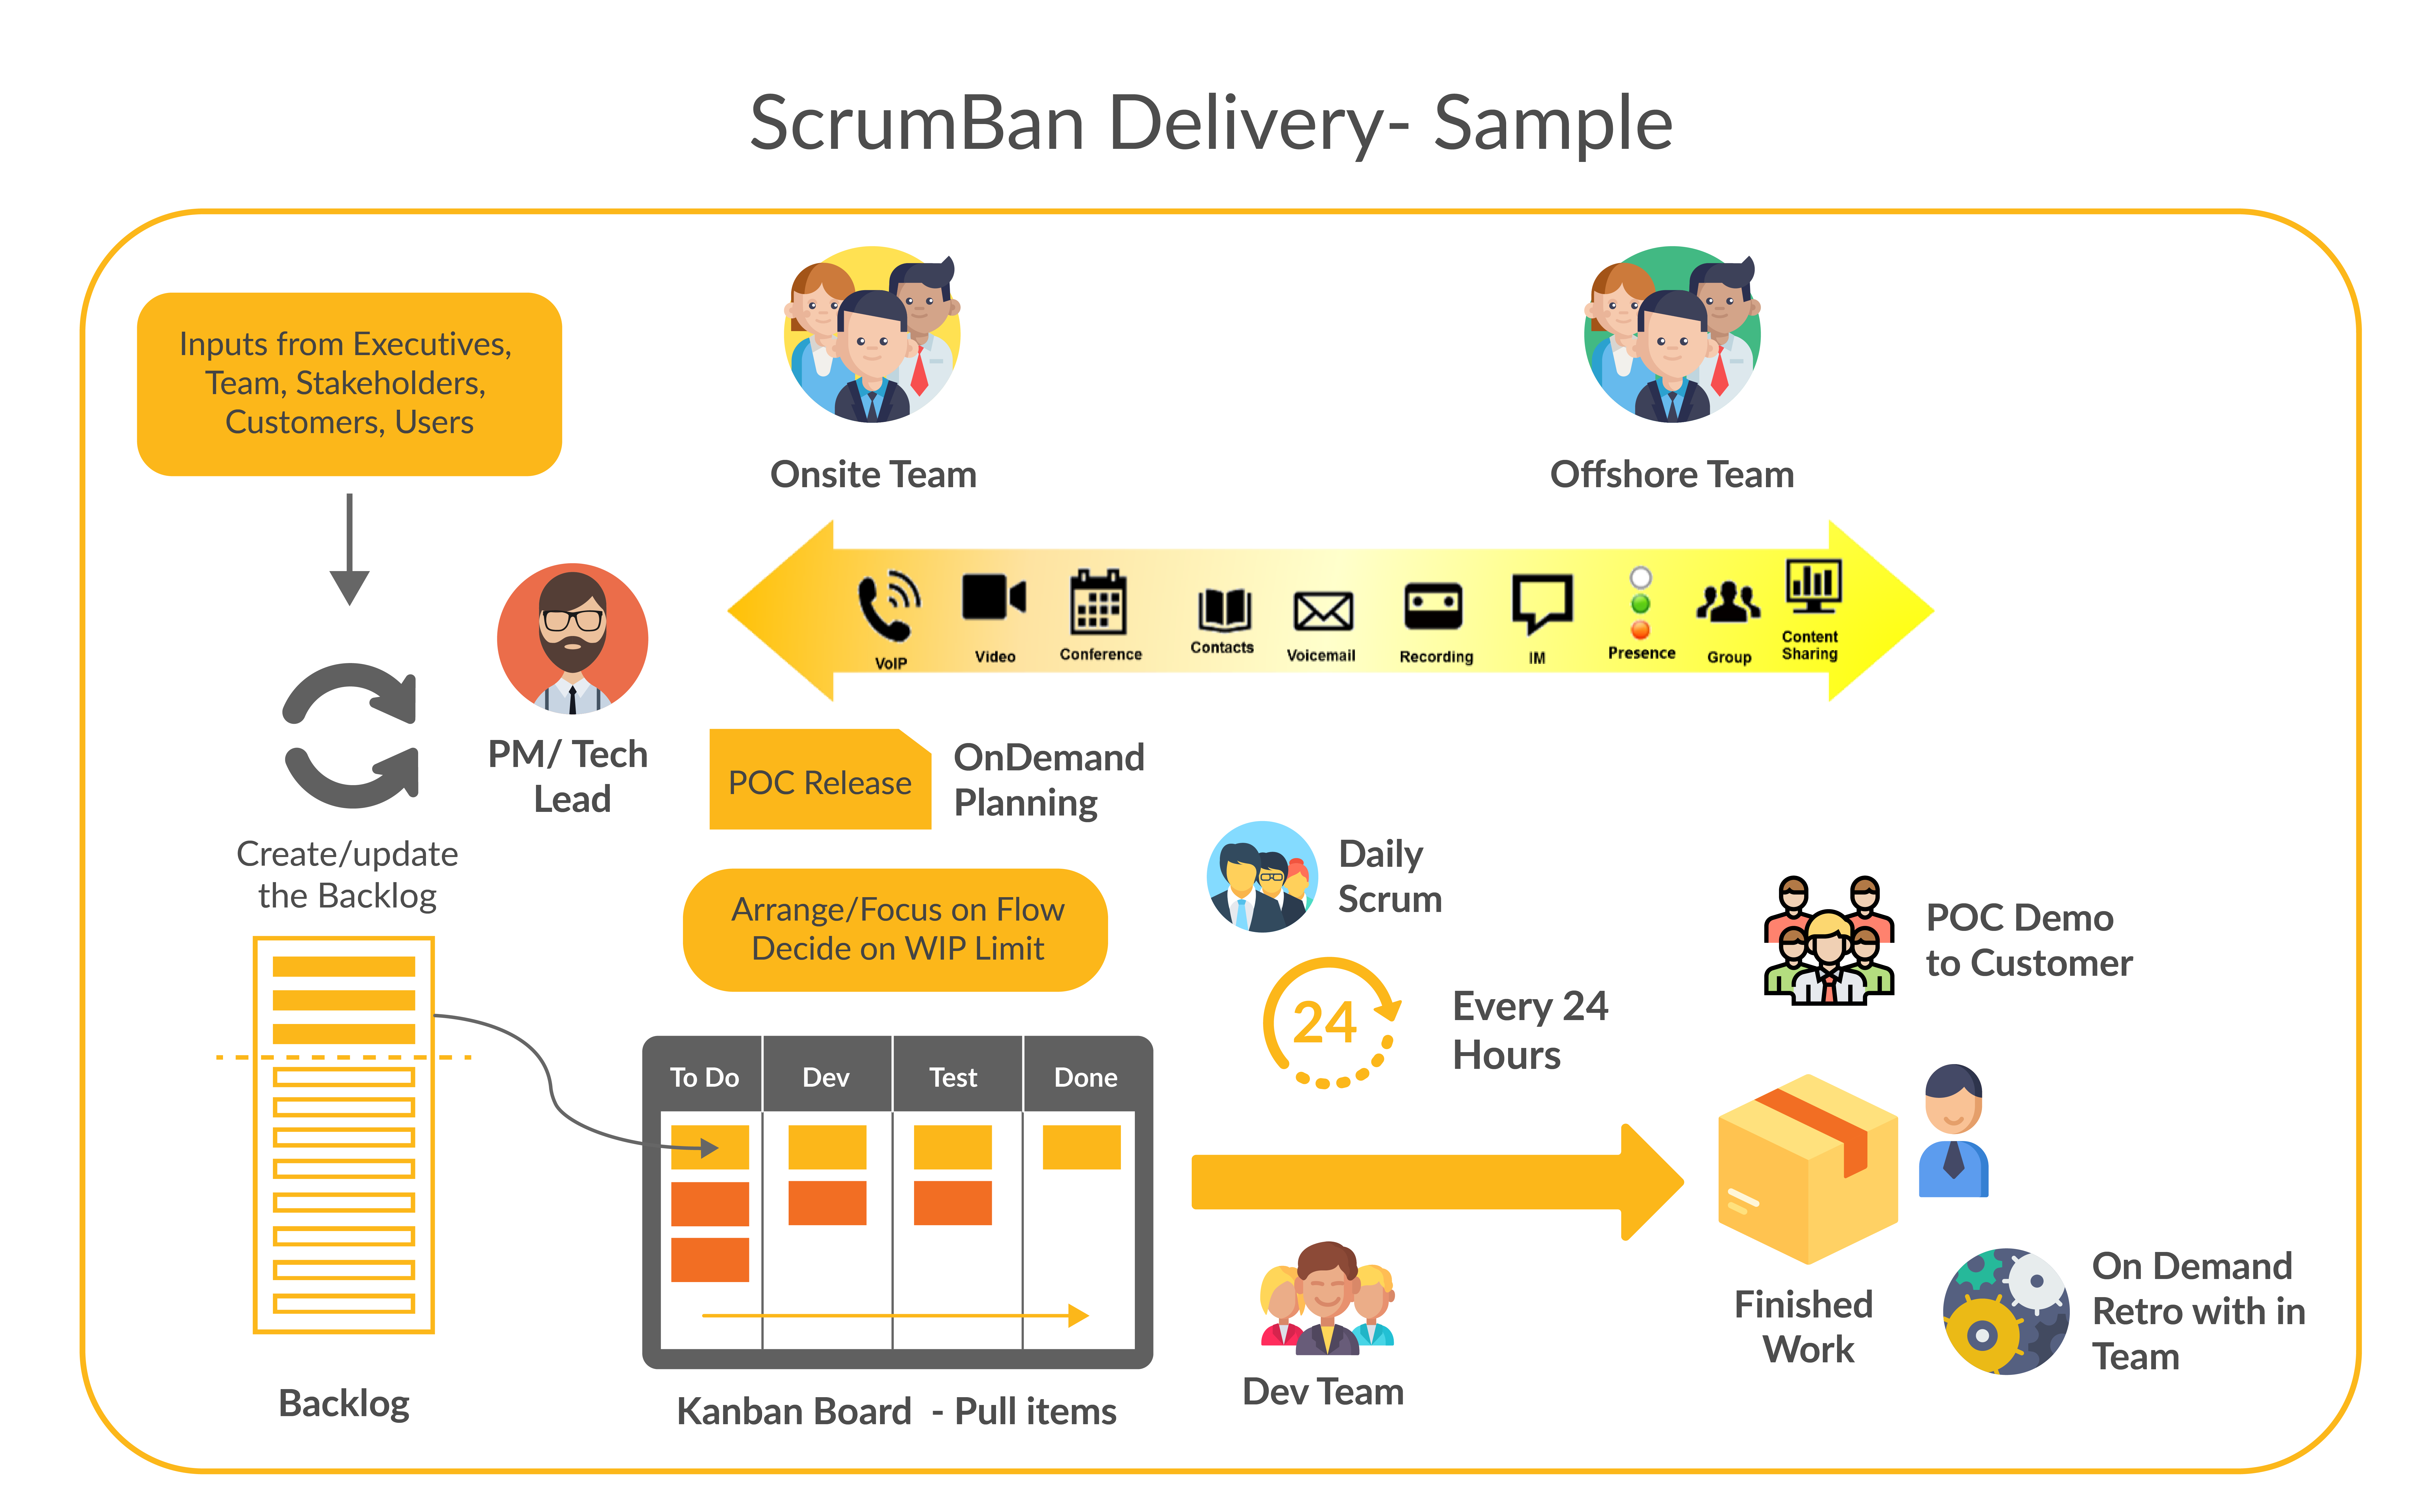 ScrumBan Delivery - Sample